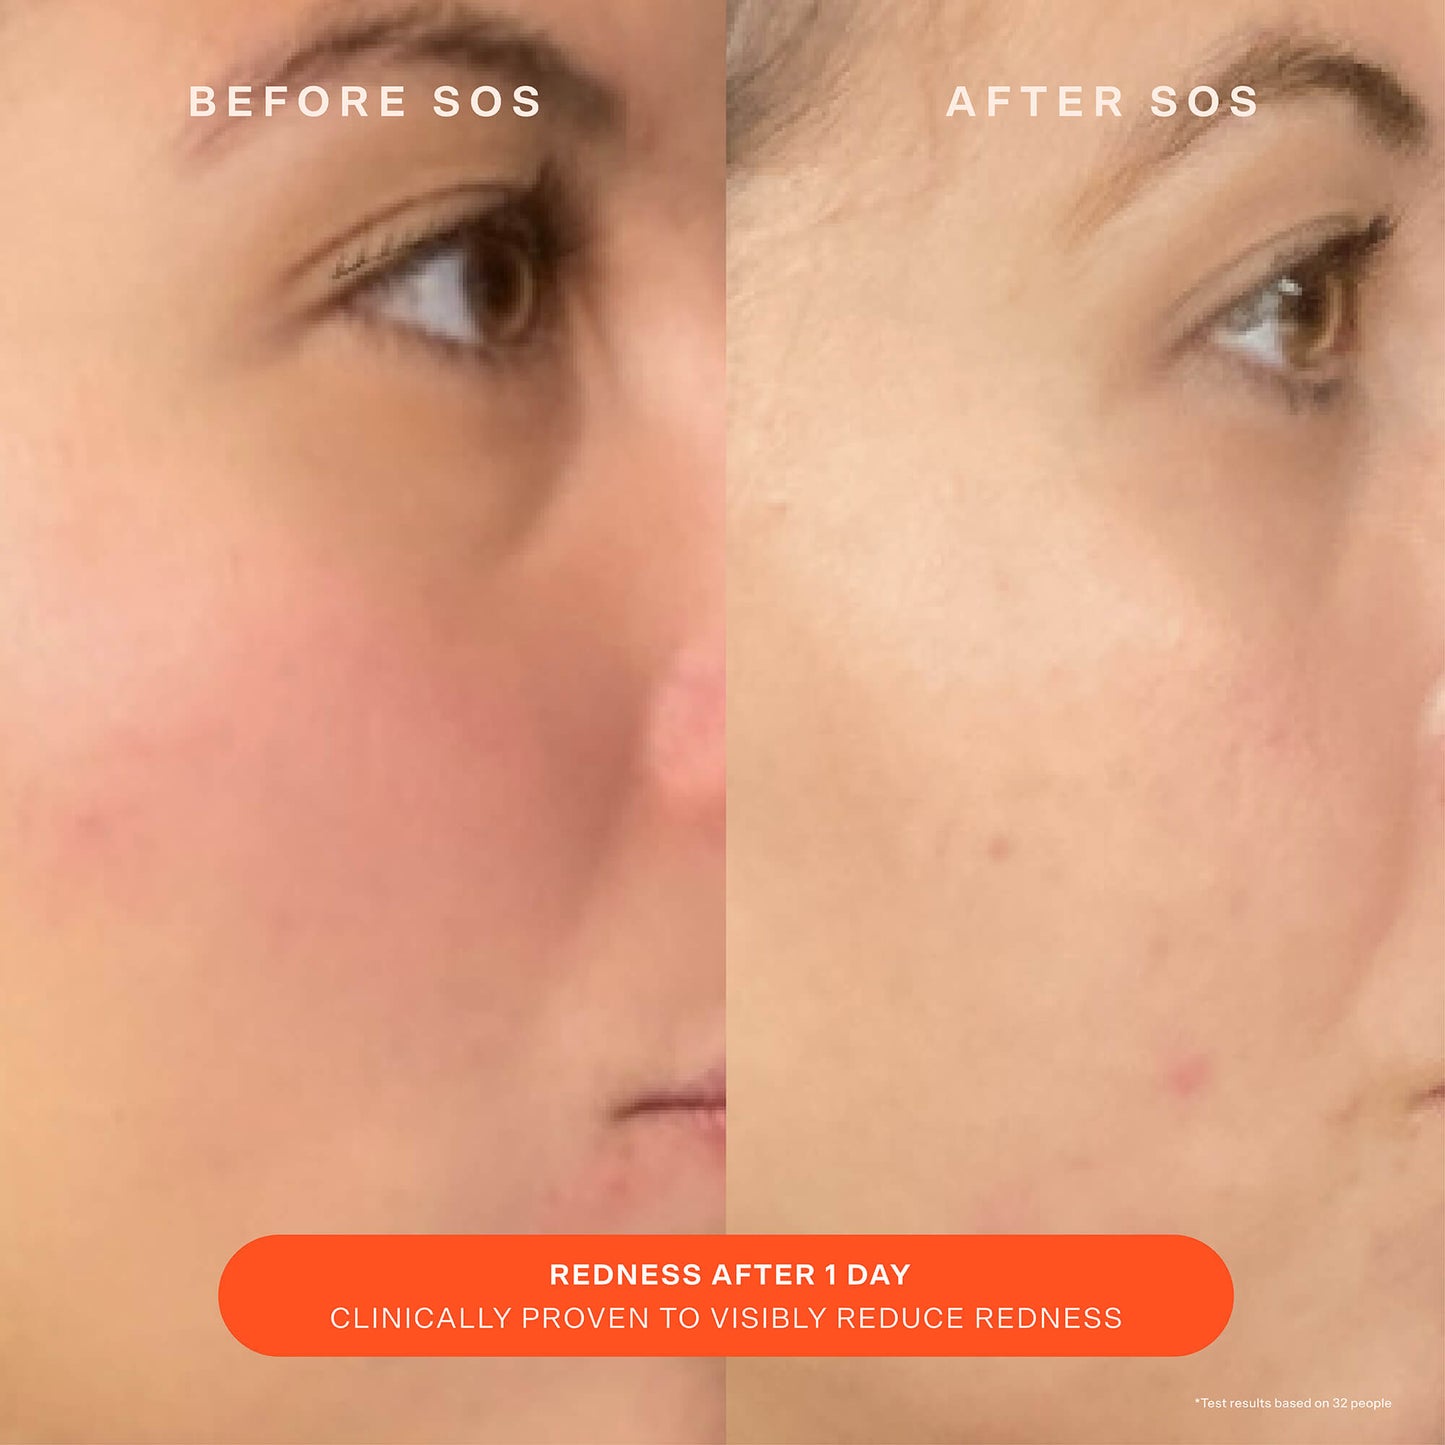 [Shared: A comparison before and after the use of Tower 28 Beauty SOS Recovery Cream. "Redness after 1 day. Clinically proven to visibly reduce redness"]